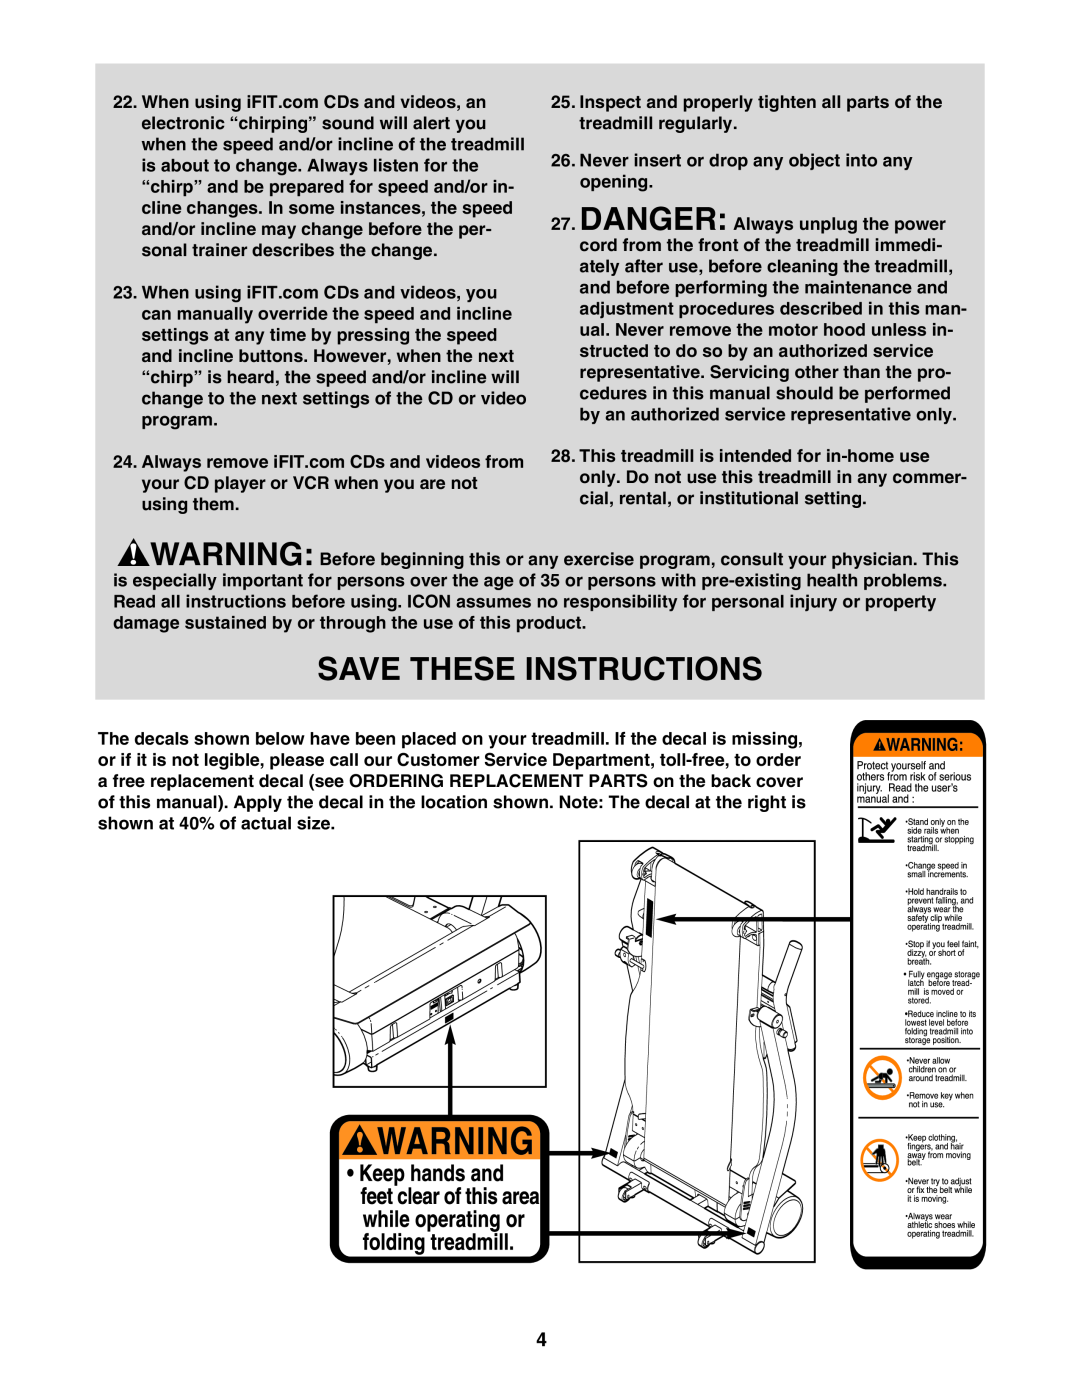 ProForm HGTL09111O, HGTL09111M Save These Instructions, Inspect and properly tighten all parts of the treadmill regularly 